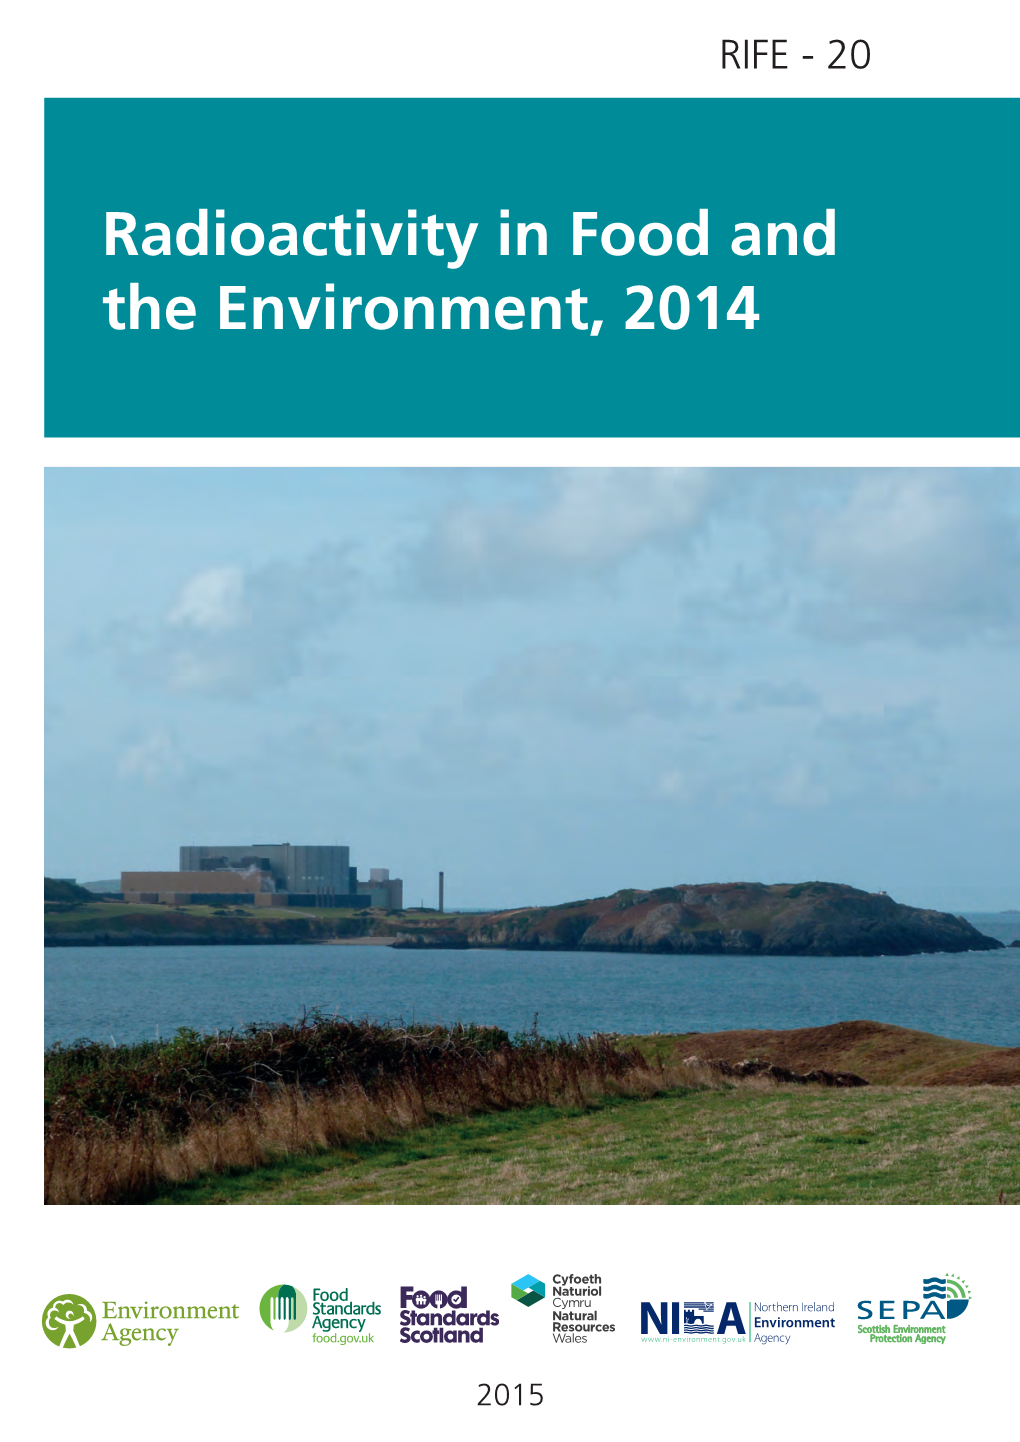 Radioactivity in Food and the Environment, 2014